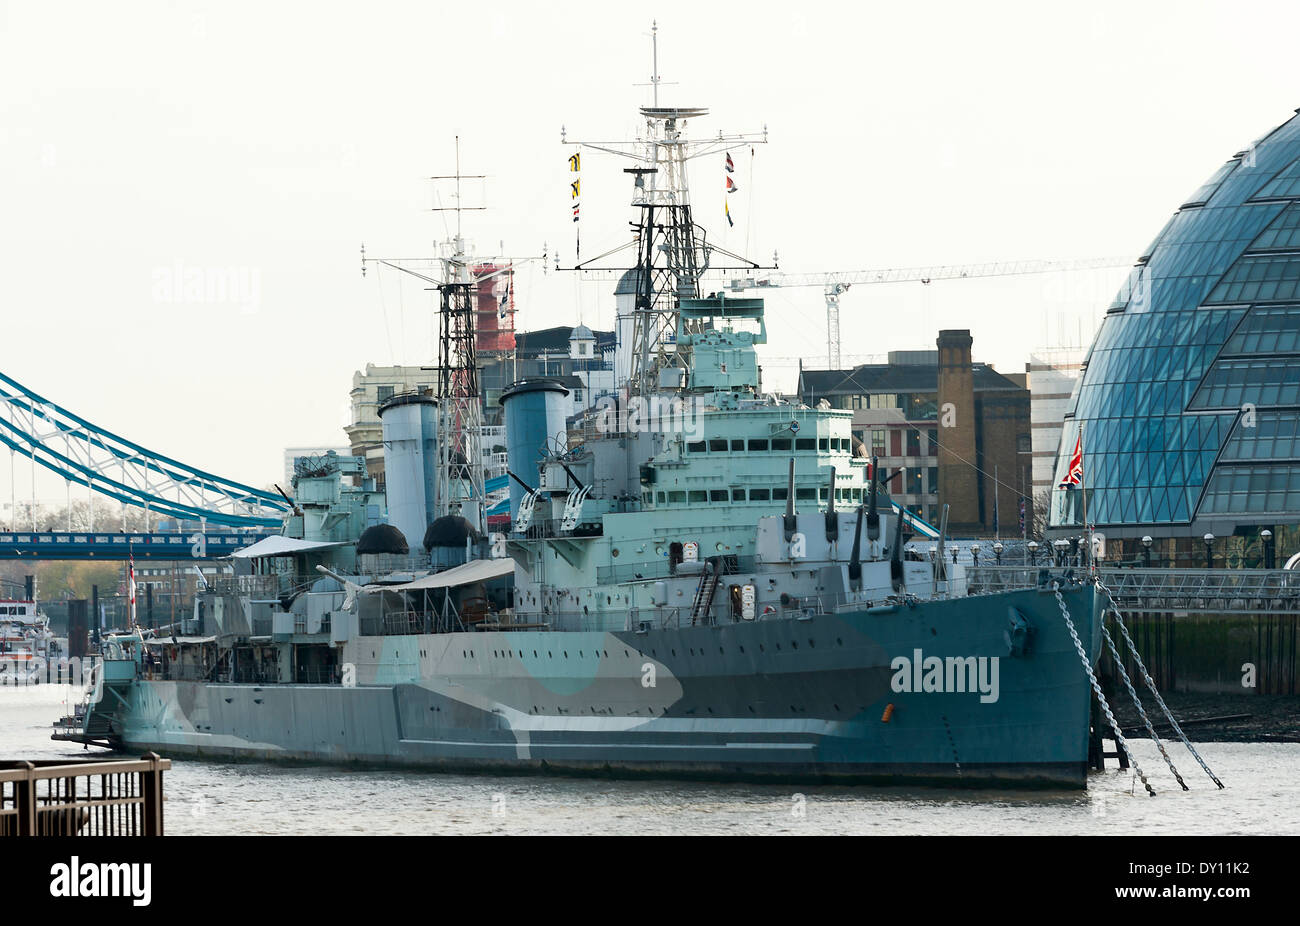 The Second World War Light Cruiser HMS Belfast Moored in The River Thames City of  Westminster London United Kingdom UK Stock Photo